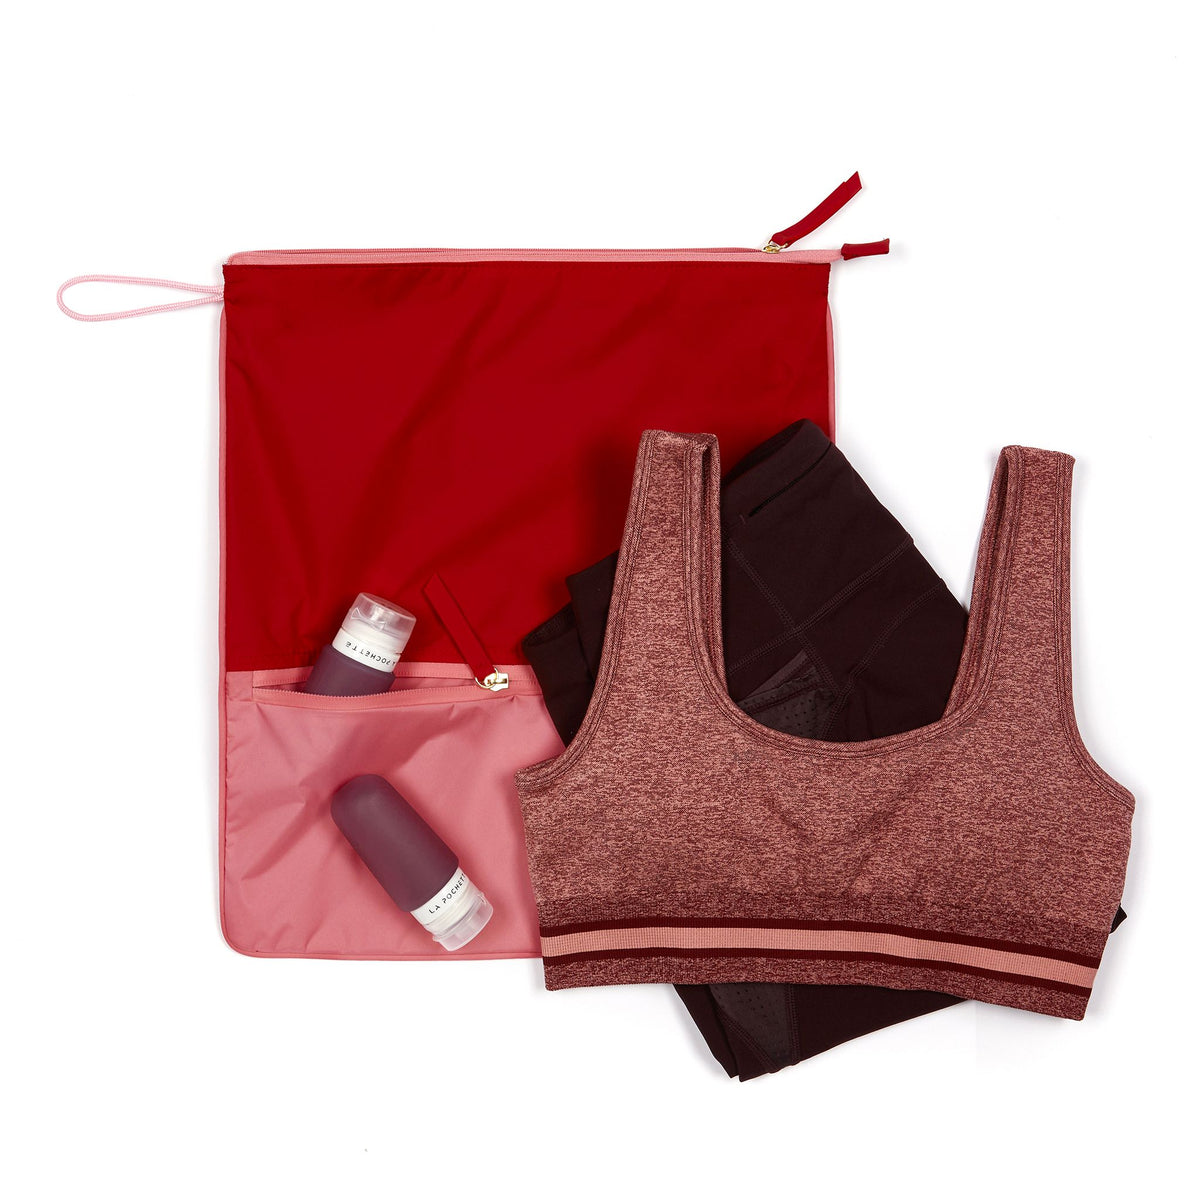 Chilli and peony Sweat Bag shown flat, with folded gym clothes and La Pochette silicone travel bottles